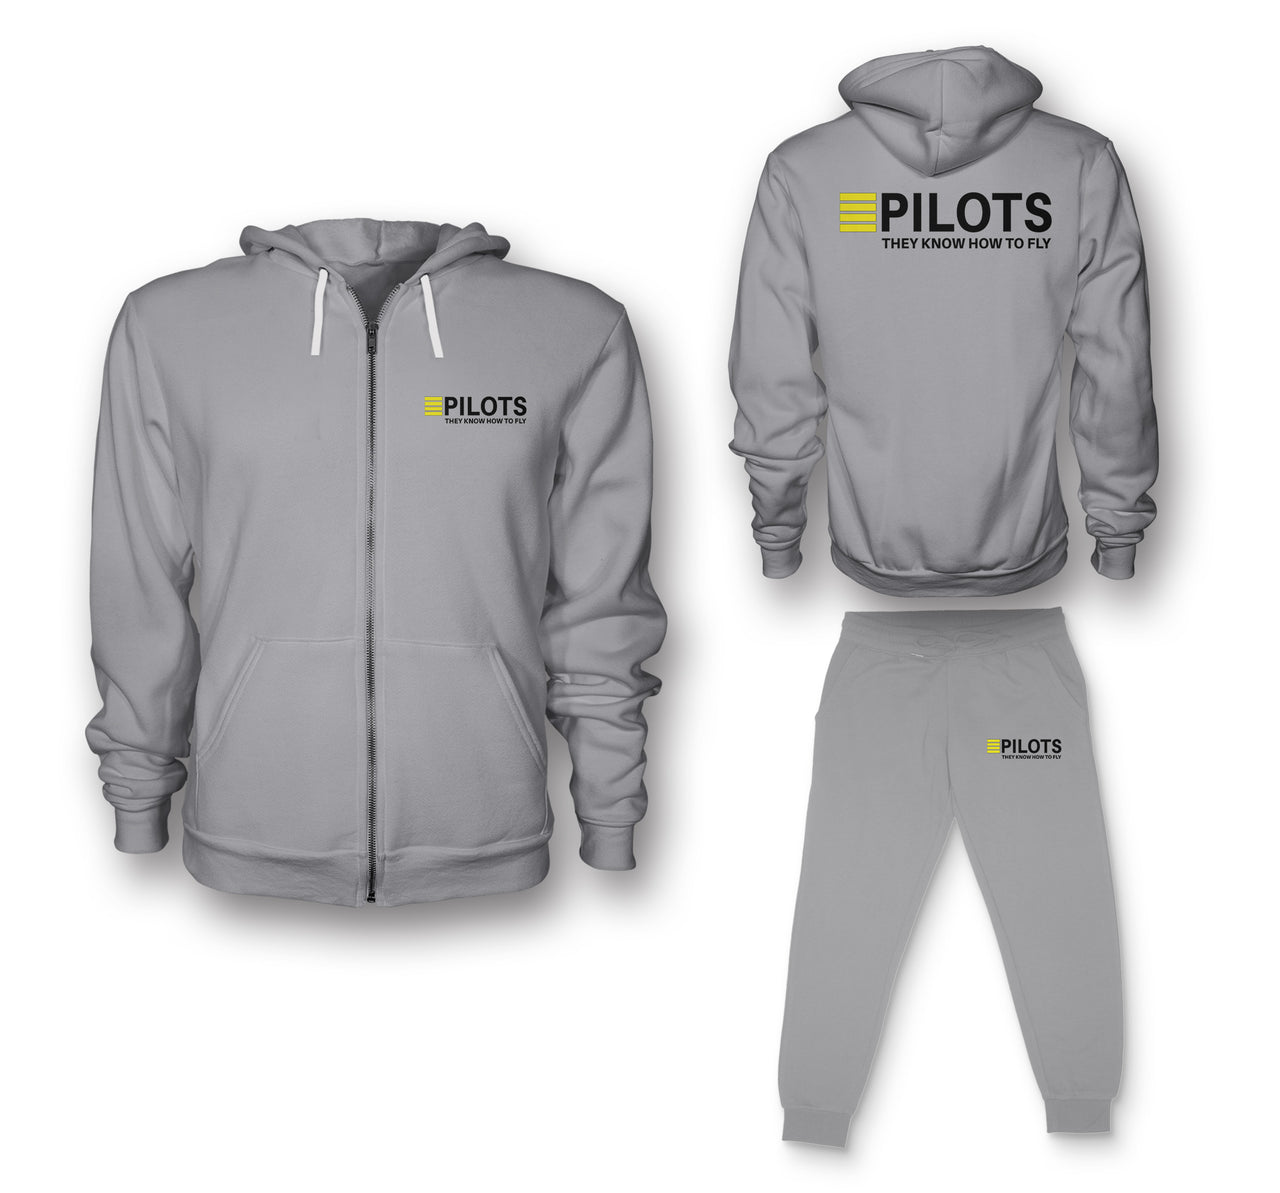 Pilots They Know How To Fly Designed Zipped Hoodies & Sweatpants Set